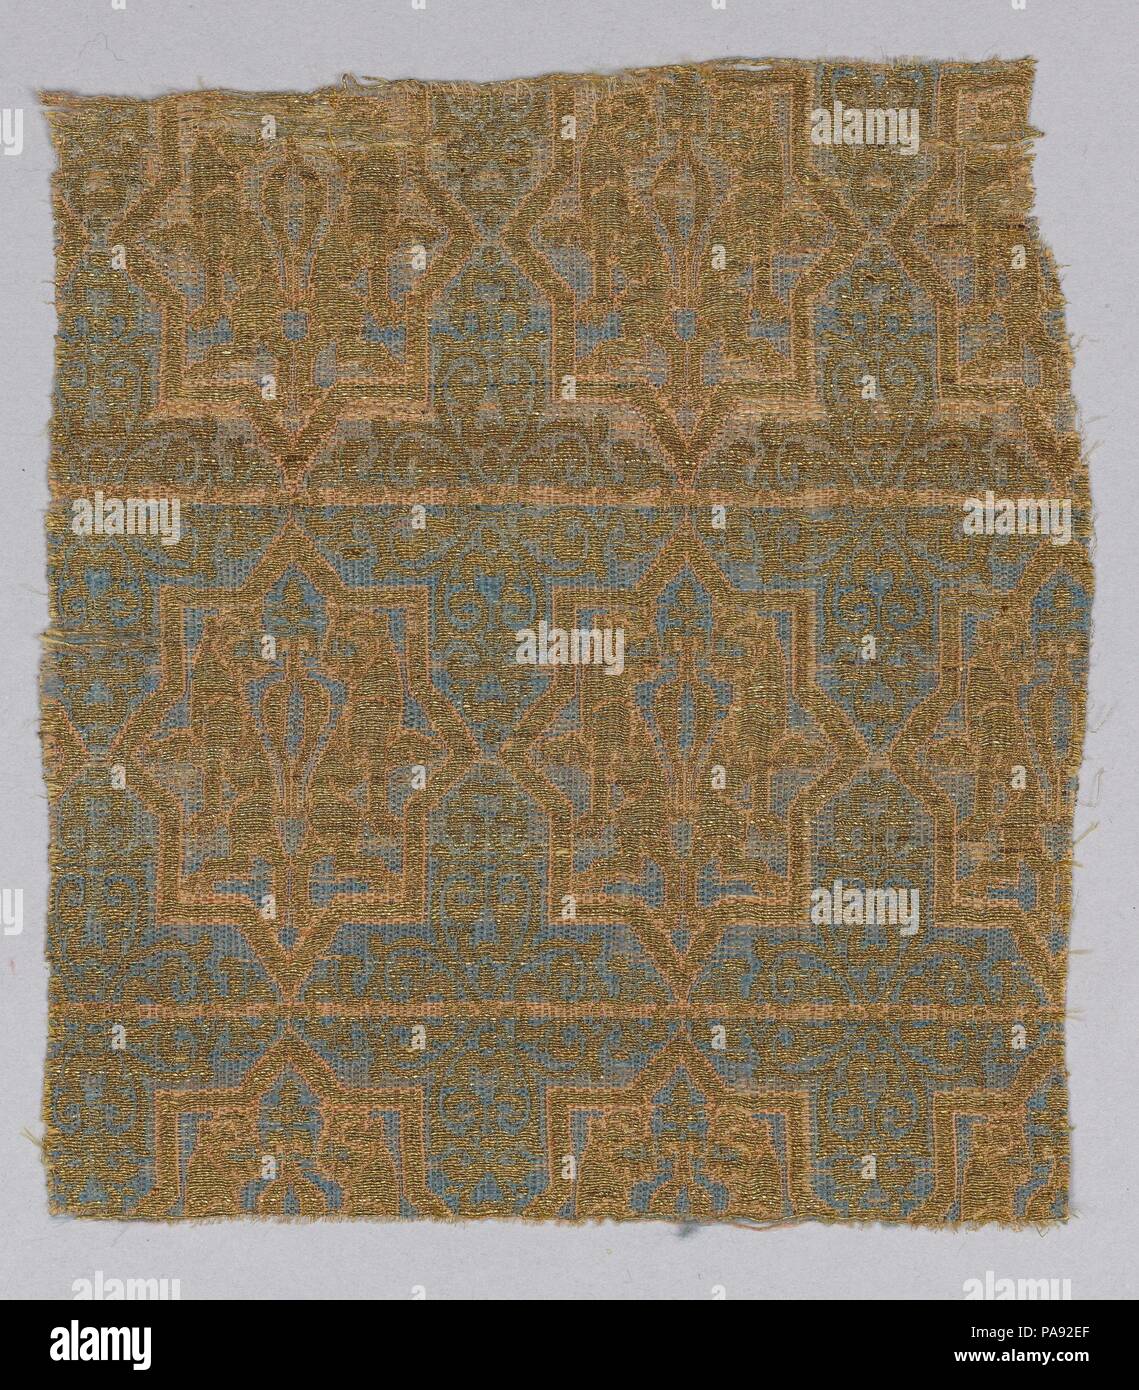 Textile Fragment from the Chasuble of San Valerius. Dimensions: Textile: L. 6 in. (15.2 cm)  W. 5 1/4 in. (13.3 cm)  Mount: H. 9 3/4 in. (24.8 cm)  W. 9 1/8 in. (23.2 cm)  D. 1 3/8 in. (3.5 cm). Date: 13th century.  This brocaded textile belongs to a collection of vestments attributed to the cult of Saint Valerius, who was the bishop of Saragossa from 290 until 315. During the eleventh century his body was transferred to the Cathedral of San Vicente de Roda de Isábena in Lerida (Catalonia), from where relics were dispatched to other churches. The textiles were made to venerate the saint, with  Stock Photo